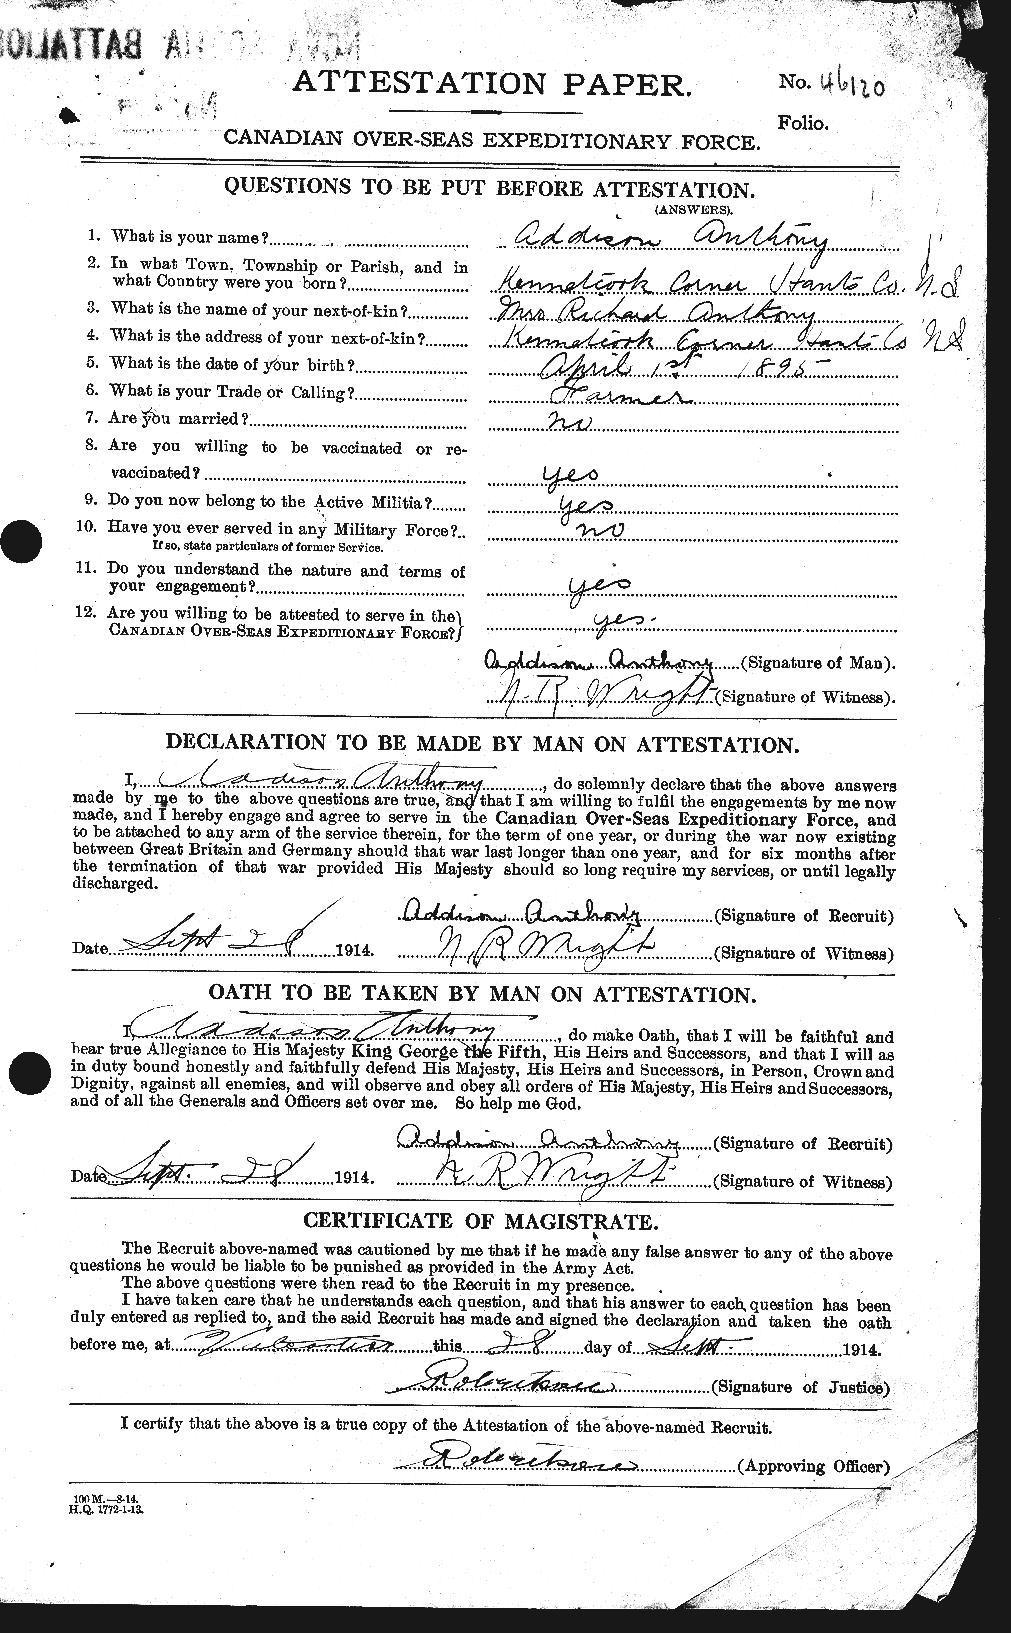 Personnel Records of the First World War - CEF 212244a